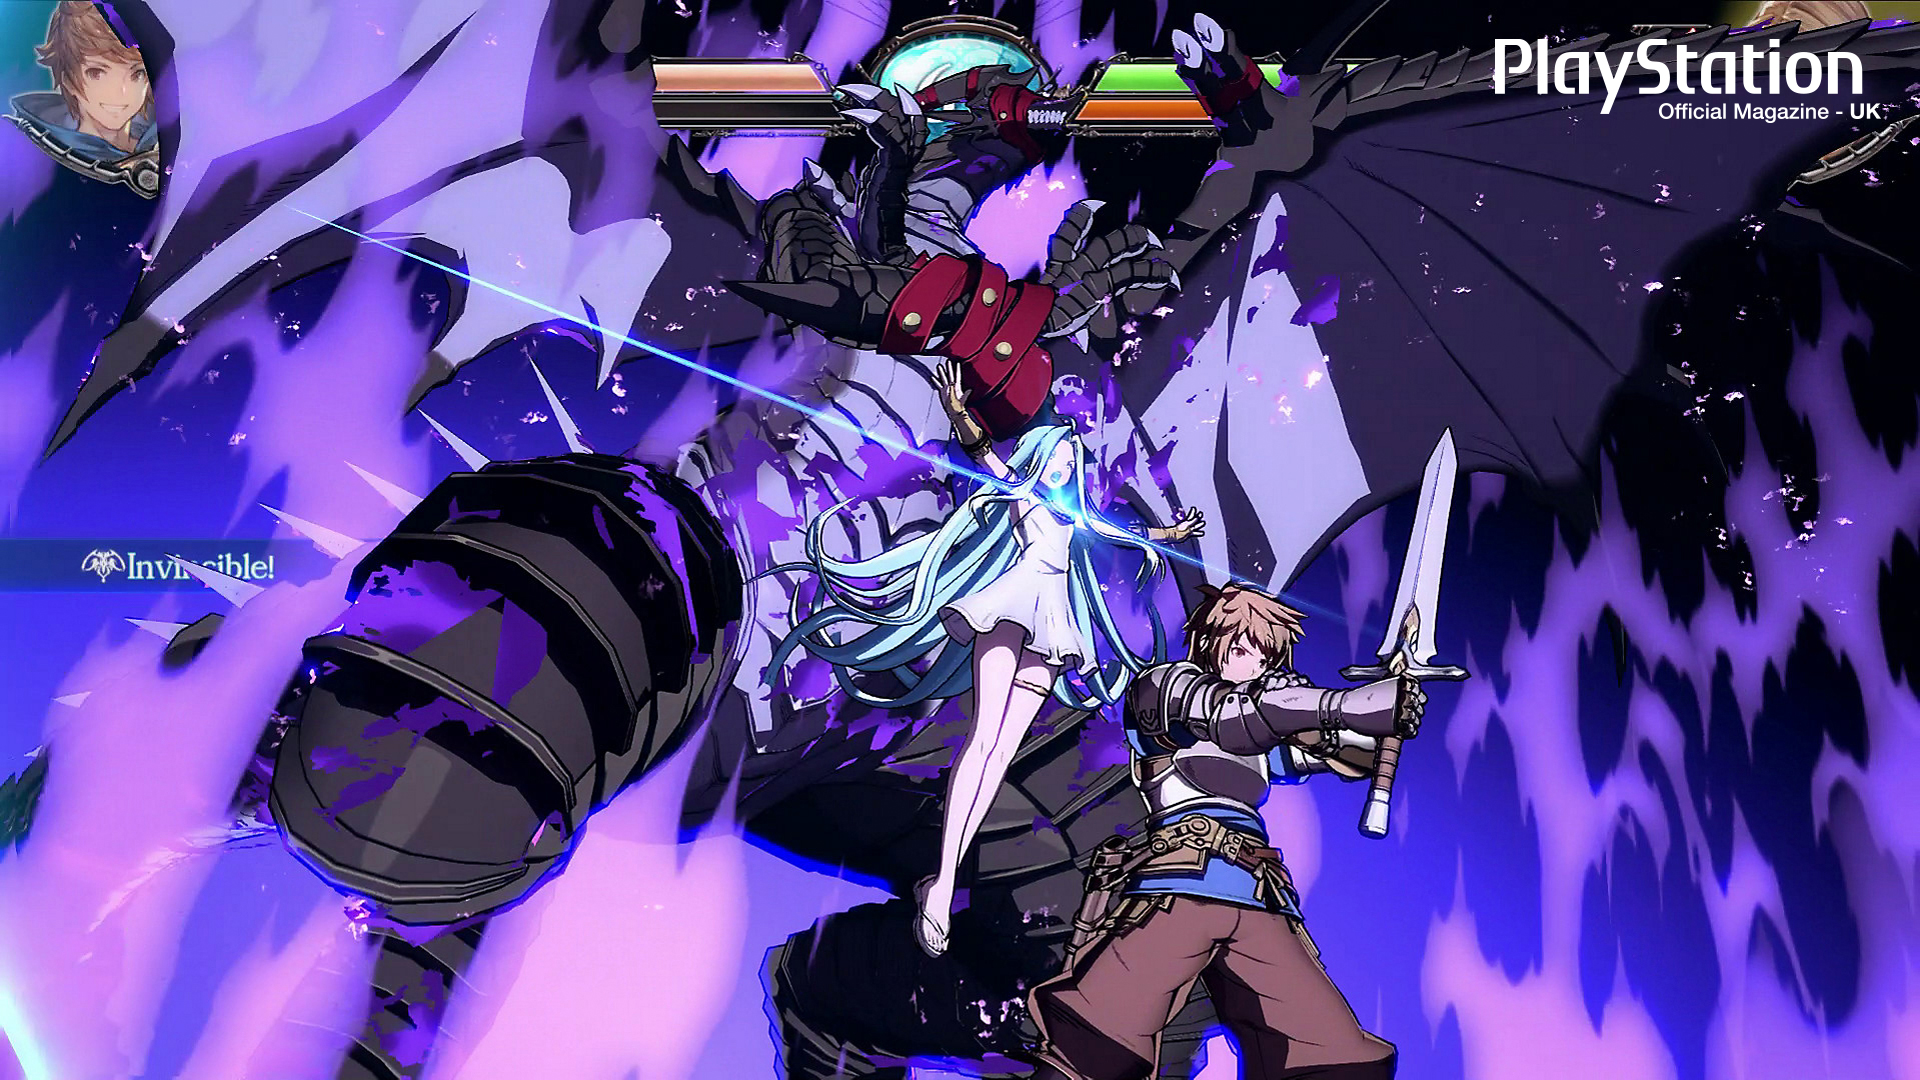 Granblue Fantasy: Versus arrives from the Dragon Ball FighterZ devs, and it’s adding extra dimensions to the fighting game genre